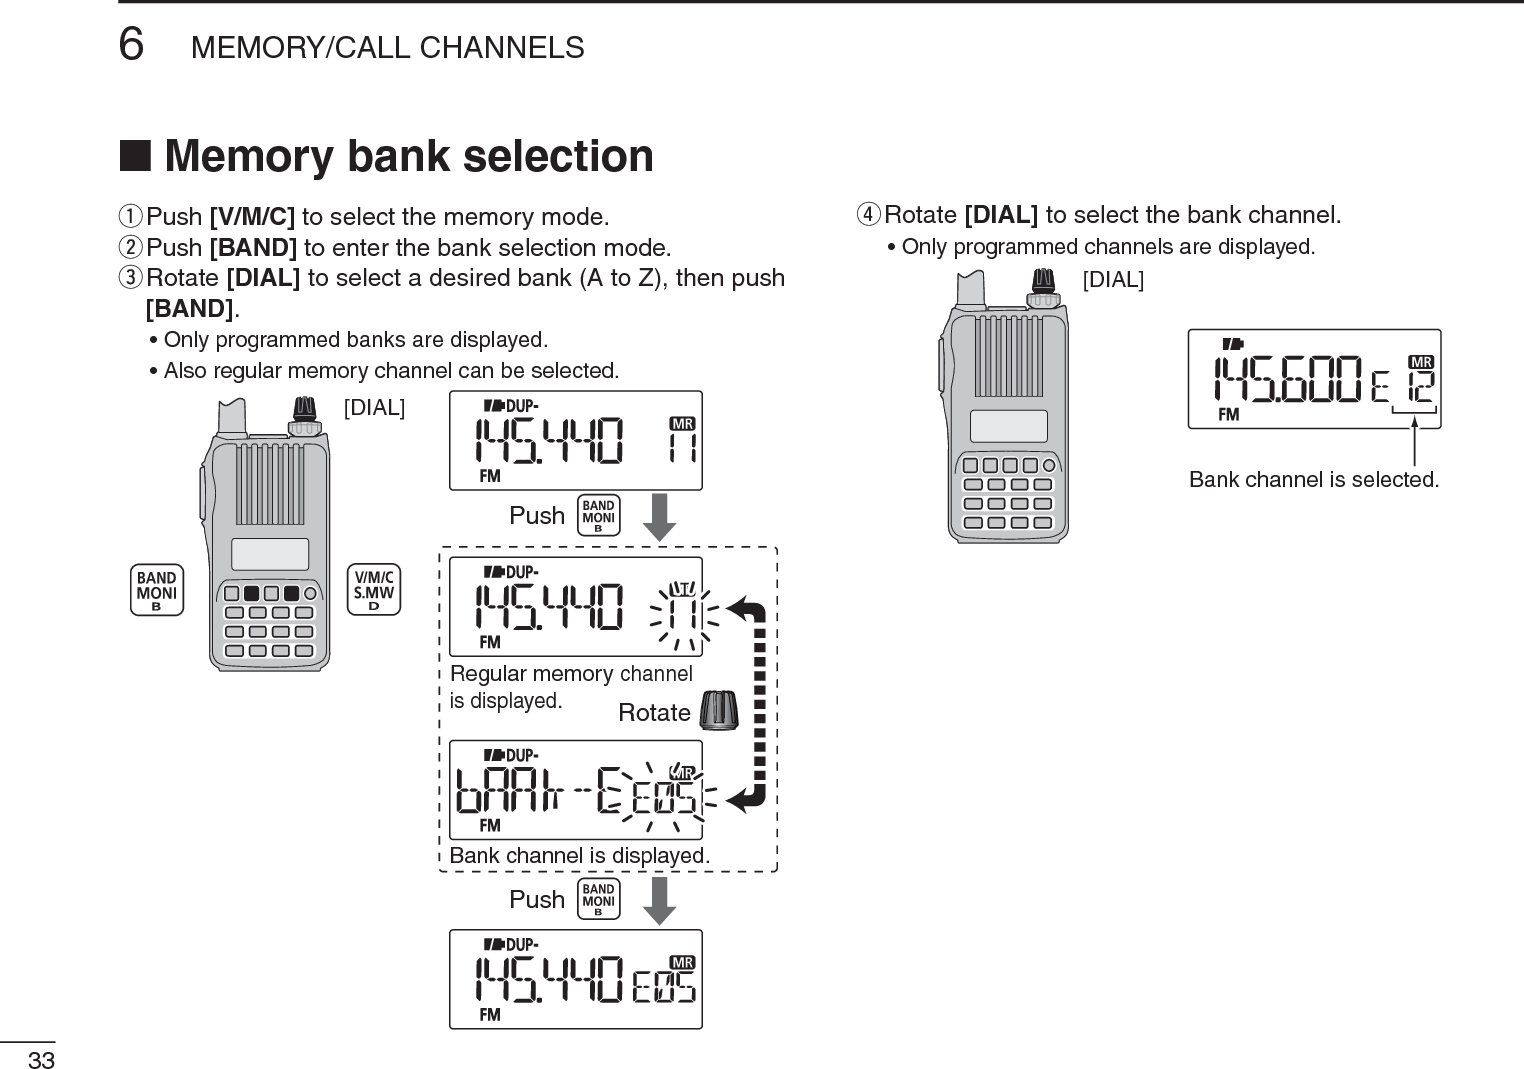 336MEMORY/CALL CHANNELSN Memory bank selectionq  Push [V/M/C] to select the memory mode.w  Push [BAND] to enter the bank selection mode.e  Rotate [DIAL] to select a desired bank (A to Z), then push [BAND].• Only programmed banks are displayed.• Also regular memory channel can be selected.[DIAL]PushRotateBank channel is displayed.Regular memorychannelis displayed.Pushr  Rotate [DIAL] to select the bank channel.• Only programmed channels are displayed.[DIAL]Bank channel is selected.